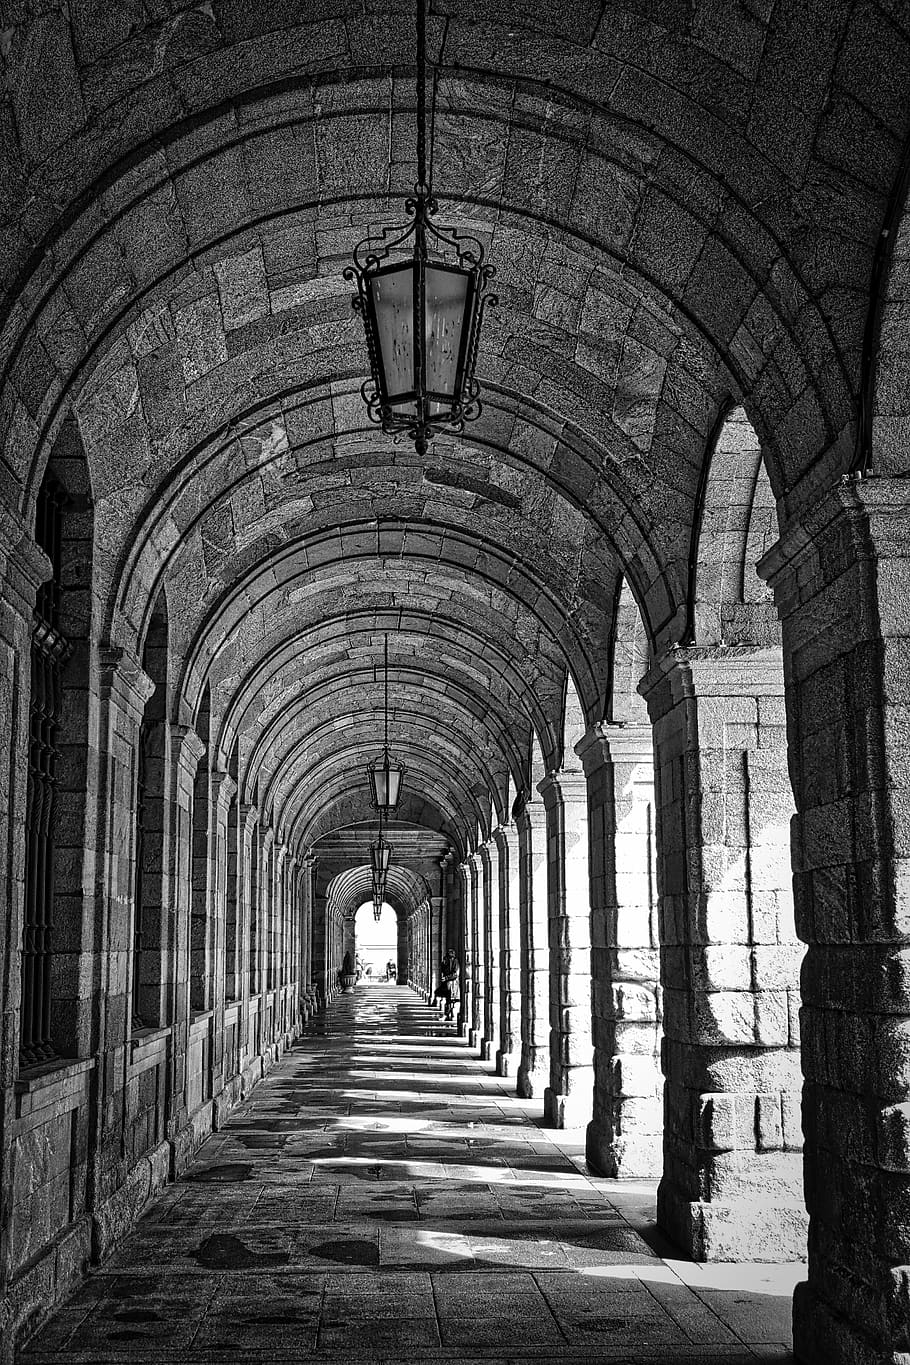 corridor, arcade, arches, passage, perspective, architecture, stone, medieval, archway, architectural